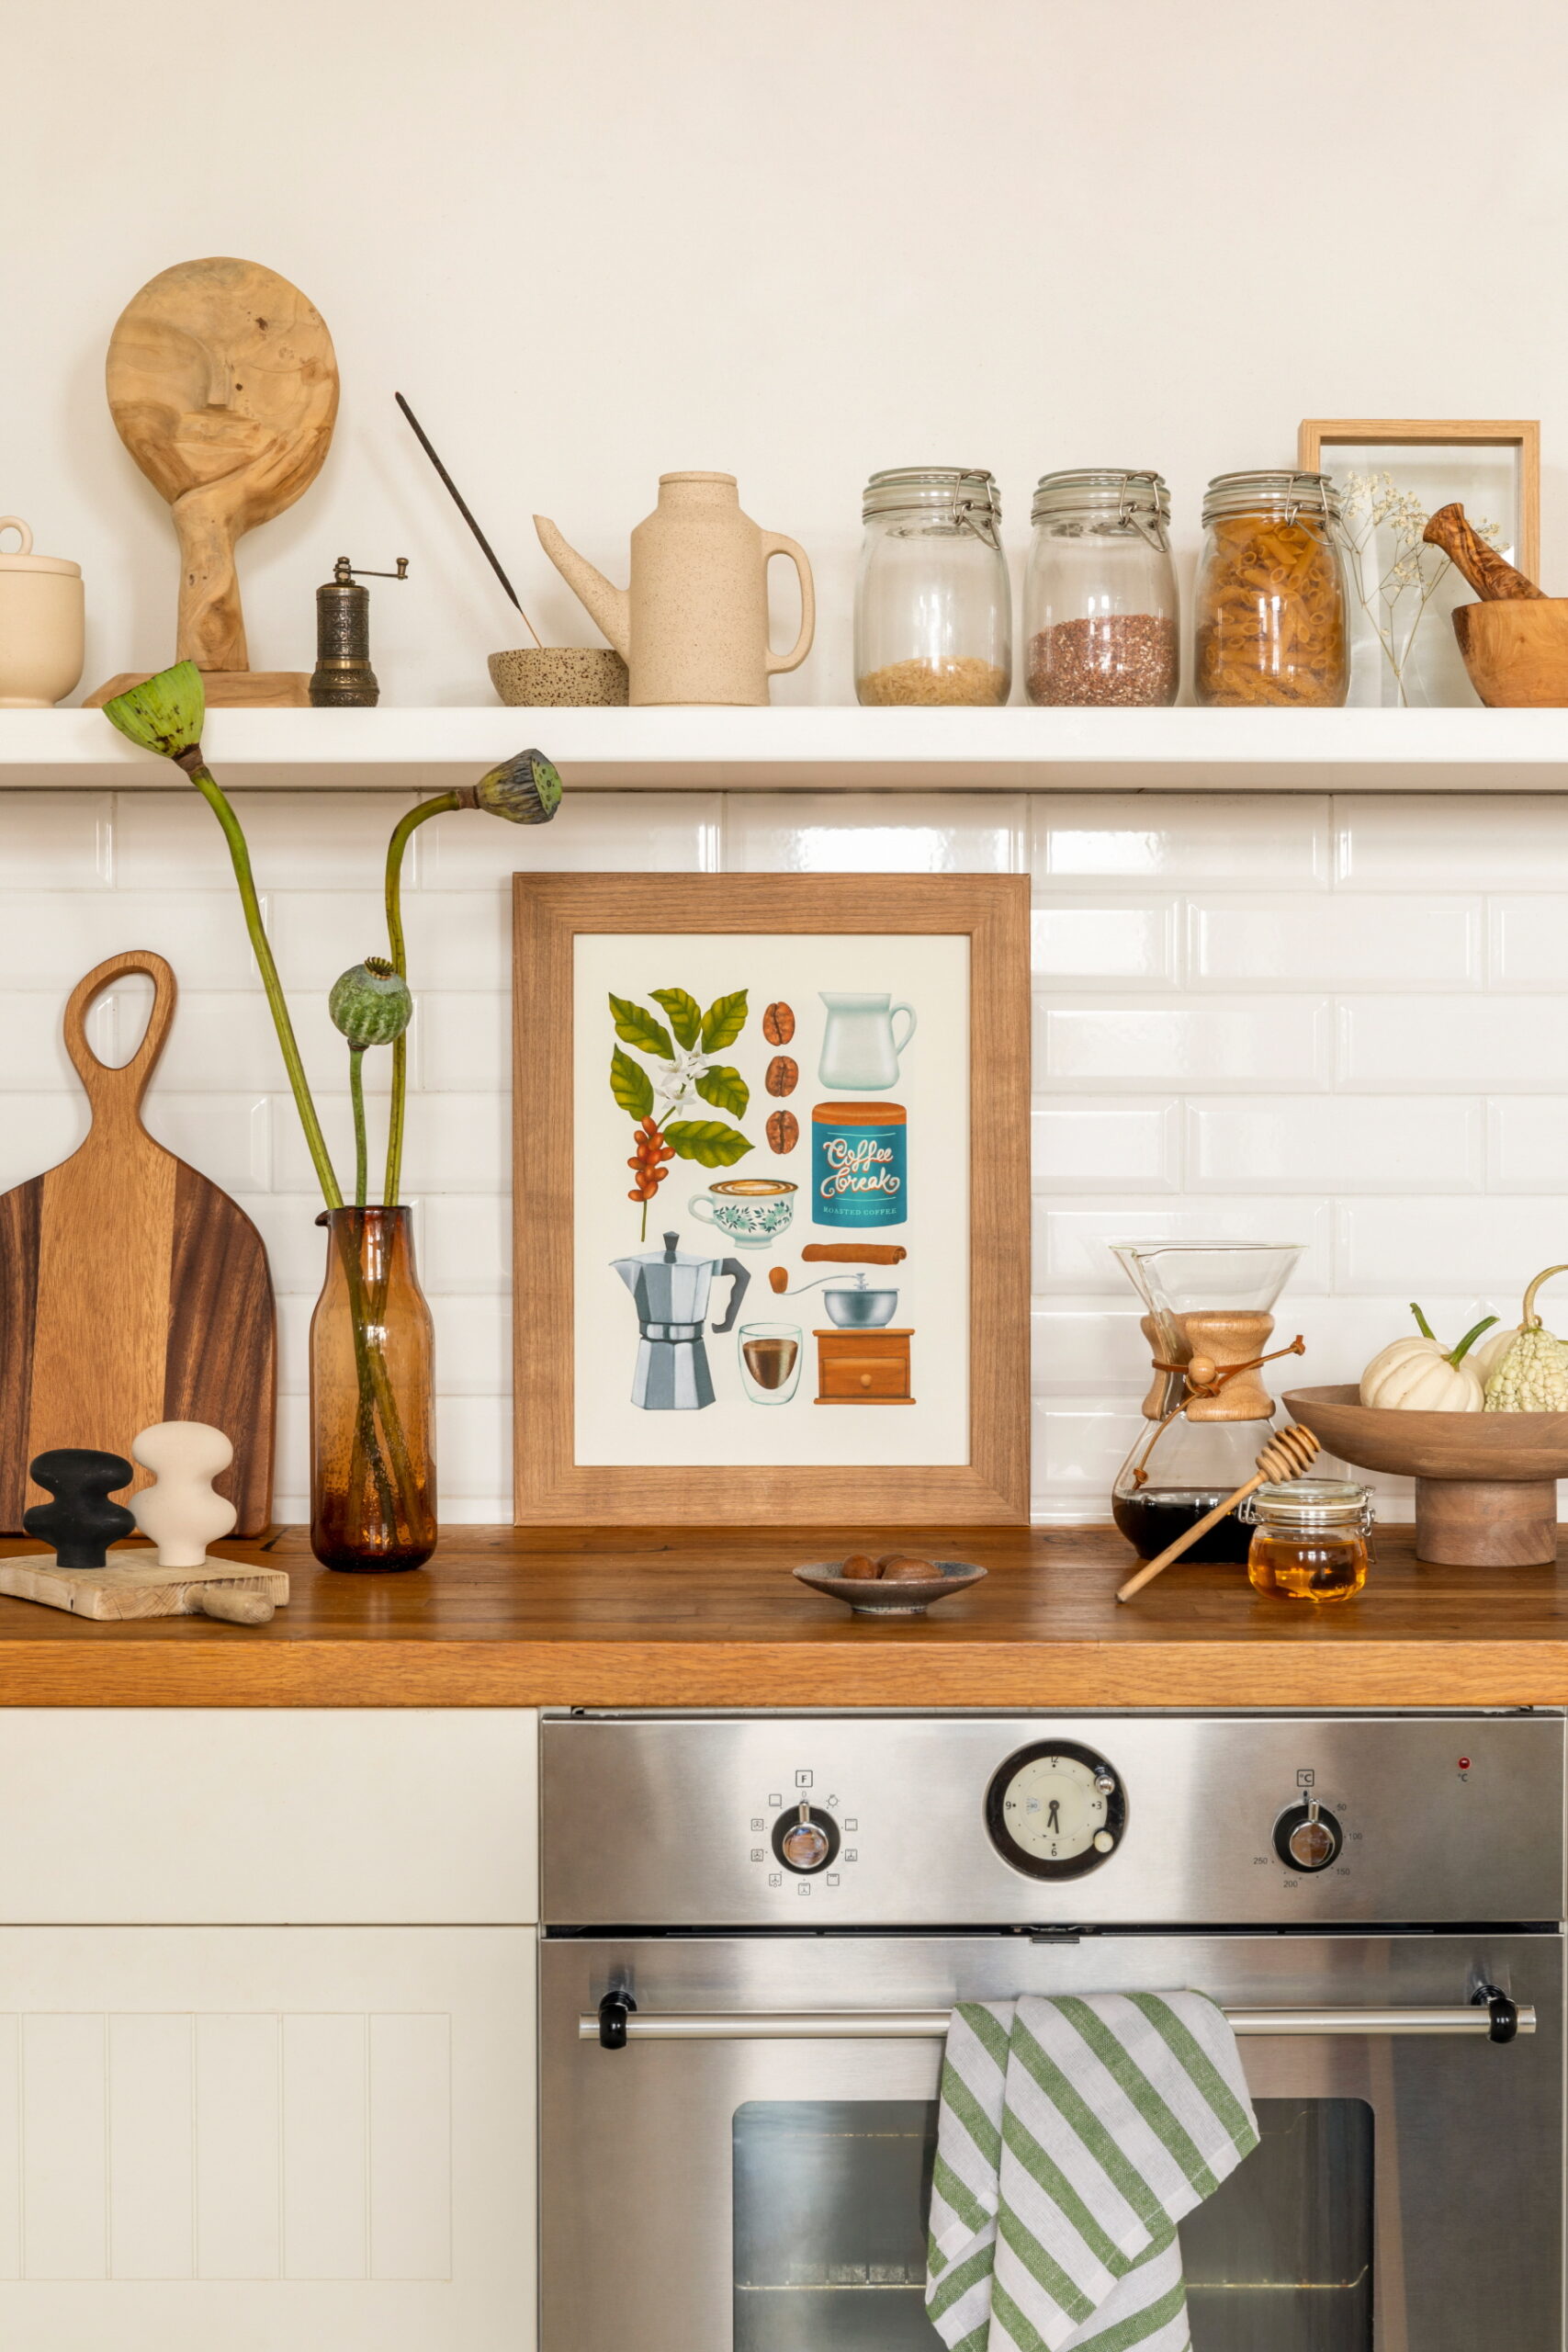 Showcase artwork against LX Hausys surfaces for a personalized, inspirational kitchen design.